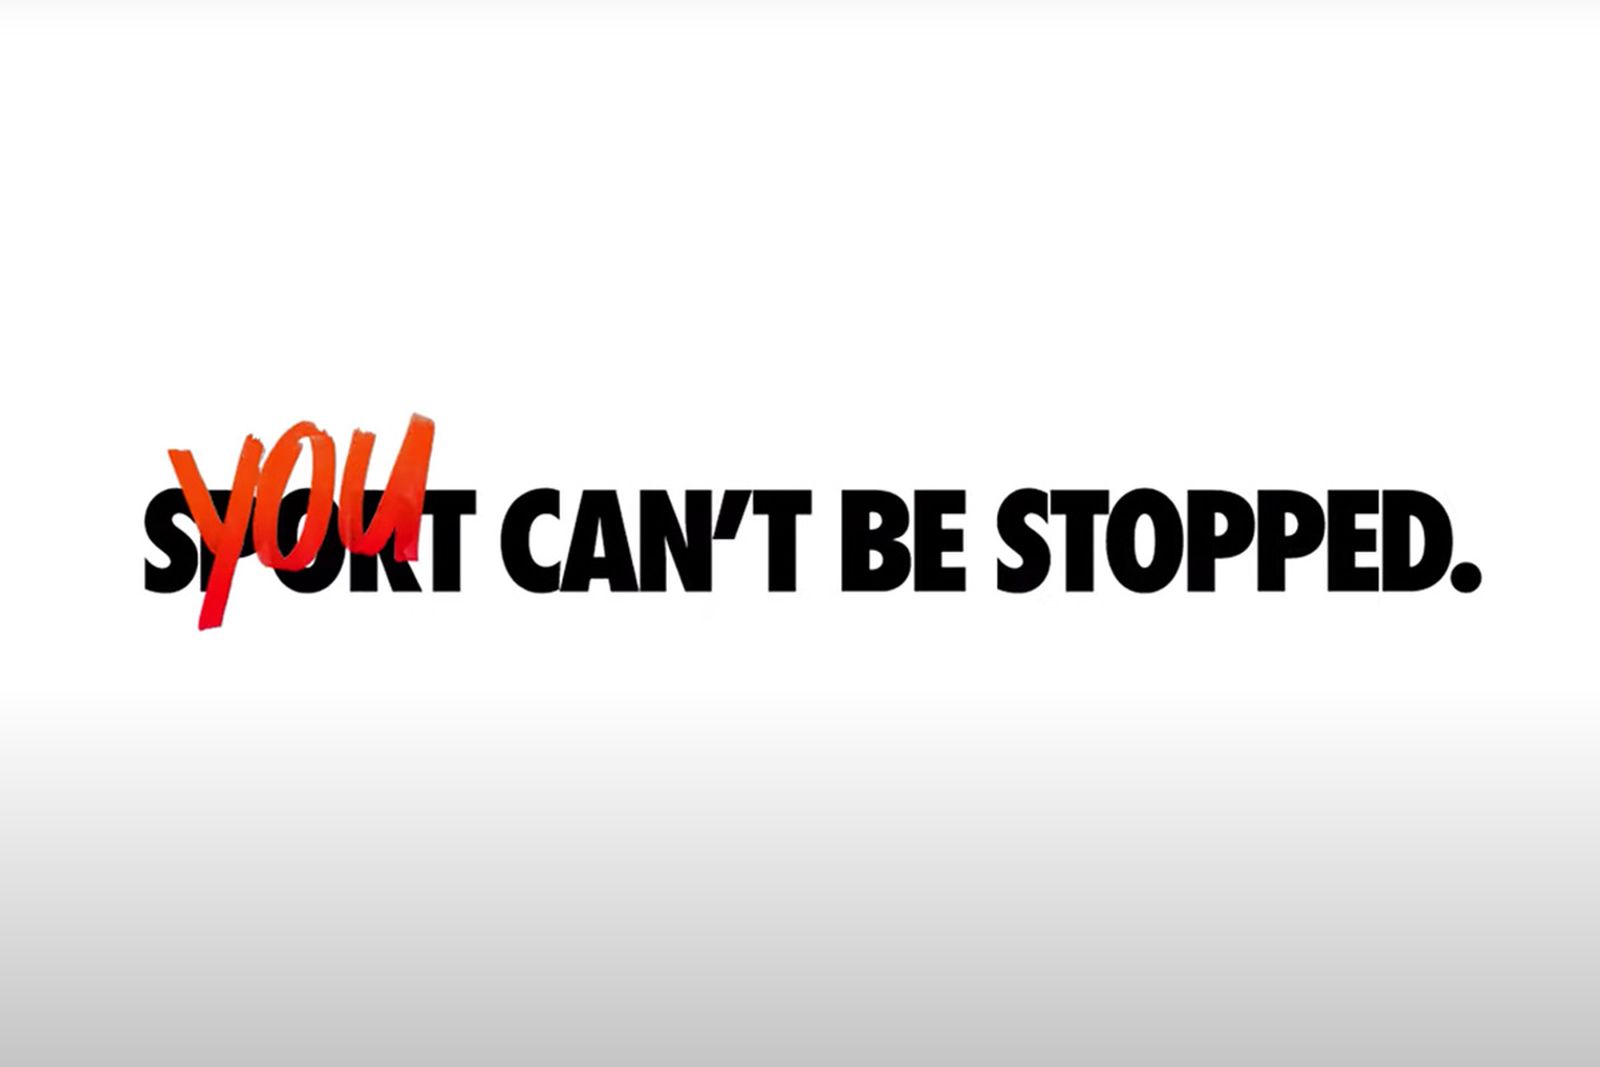 nike-you-cant-be-stopped-ad-01